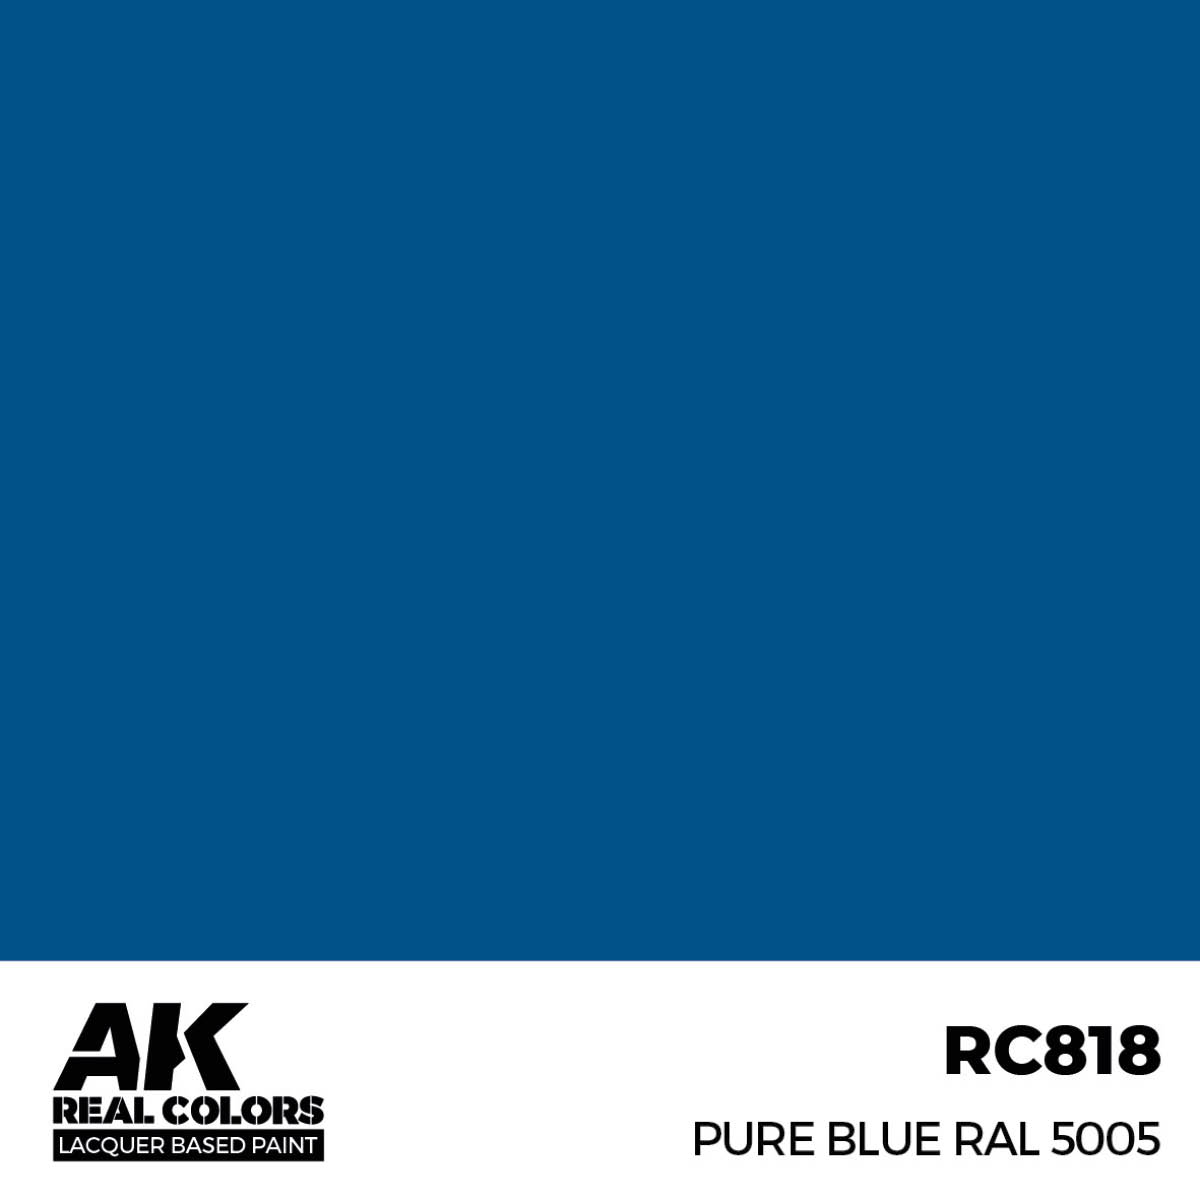 Pure Blue RAL 5005